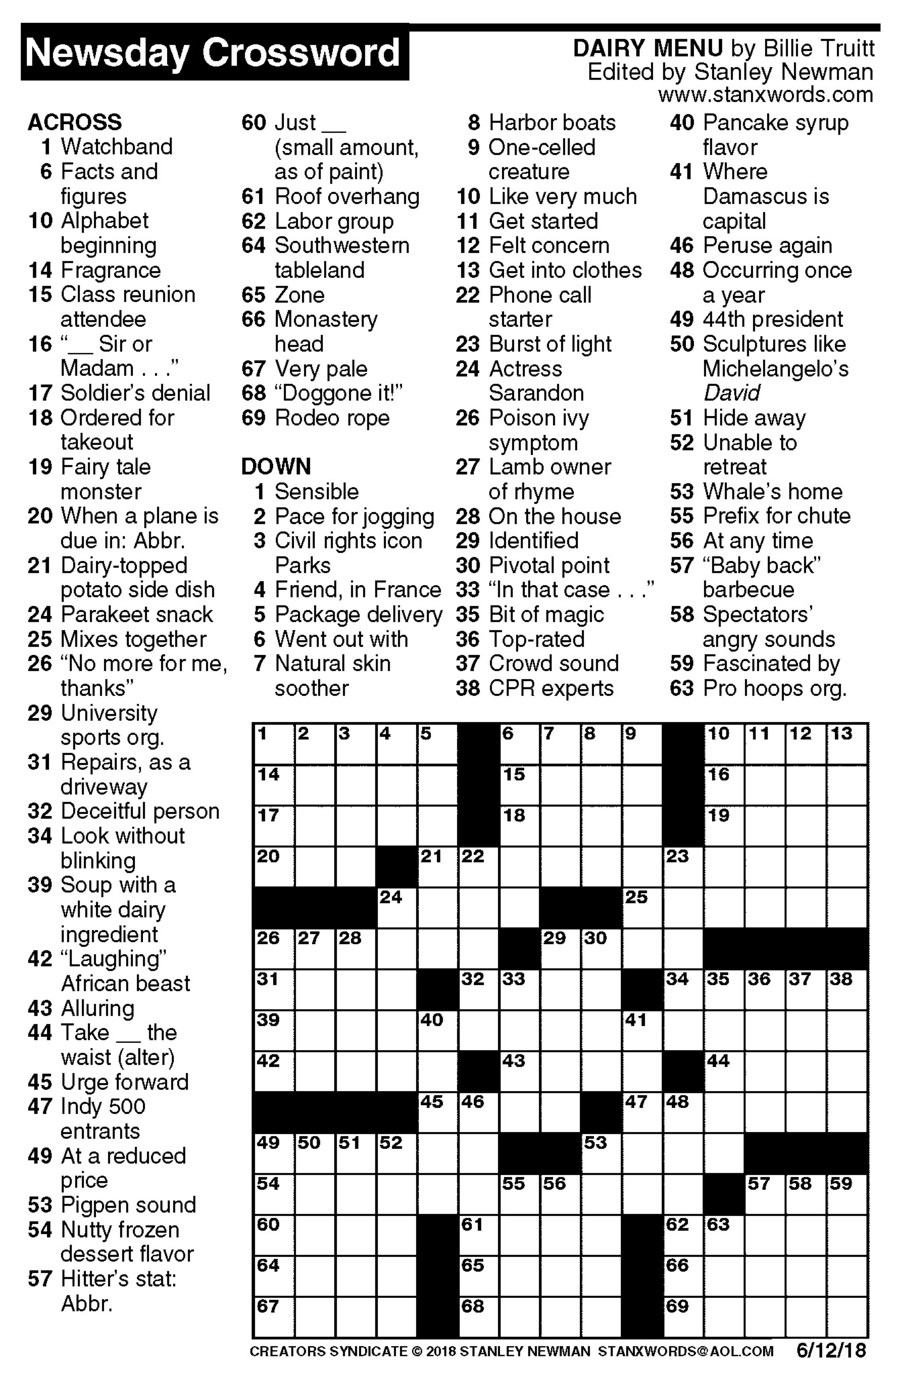 Newsday Crossword Puzzle For Jun 12 2018 By Stanley Newman Creators 